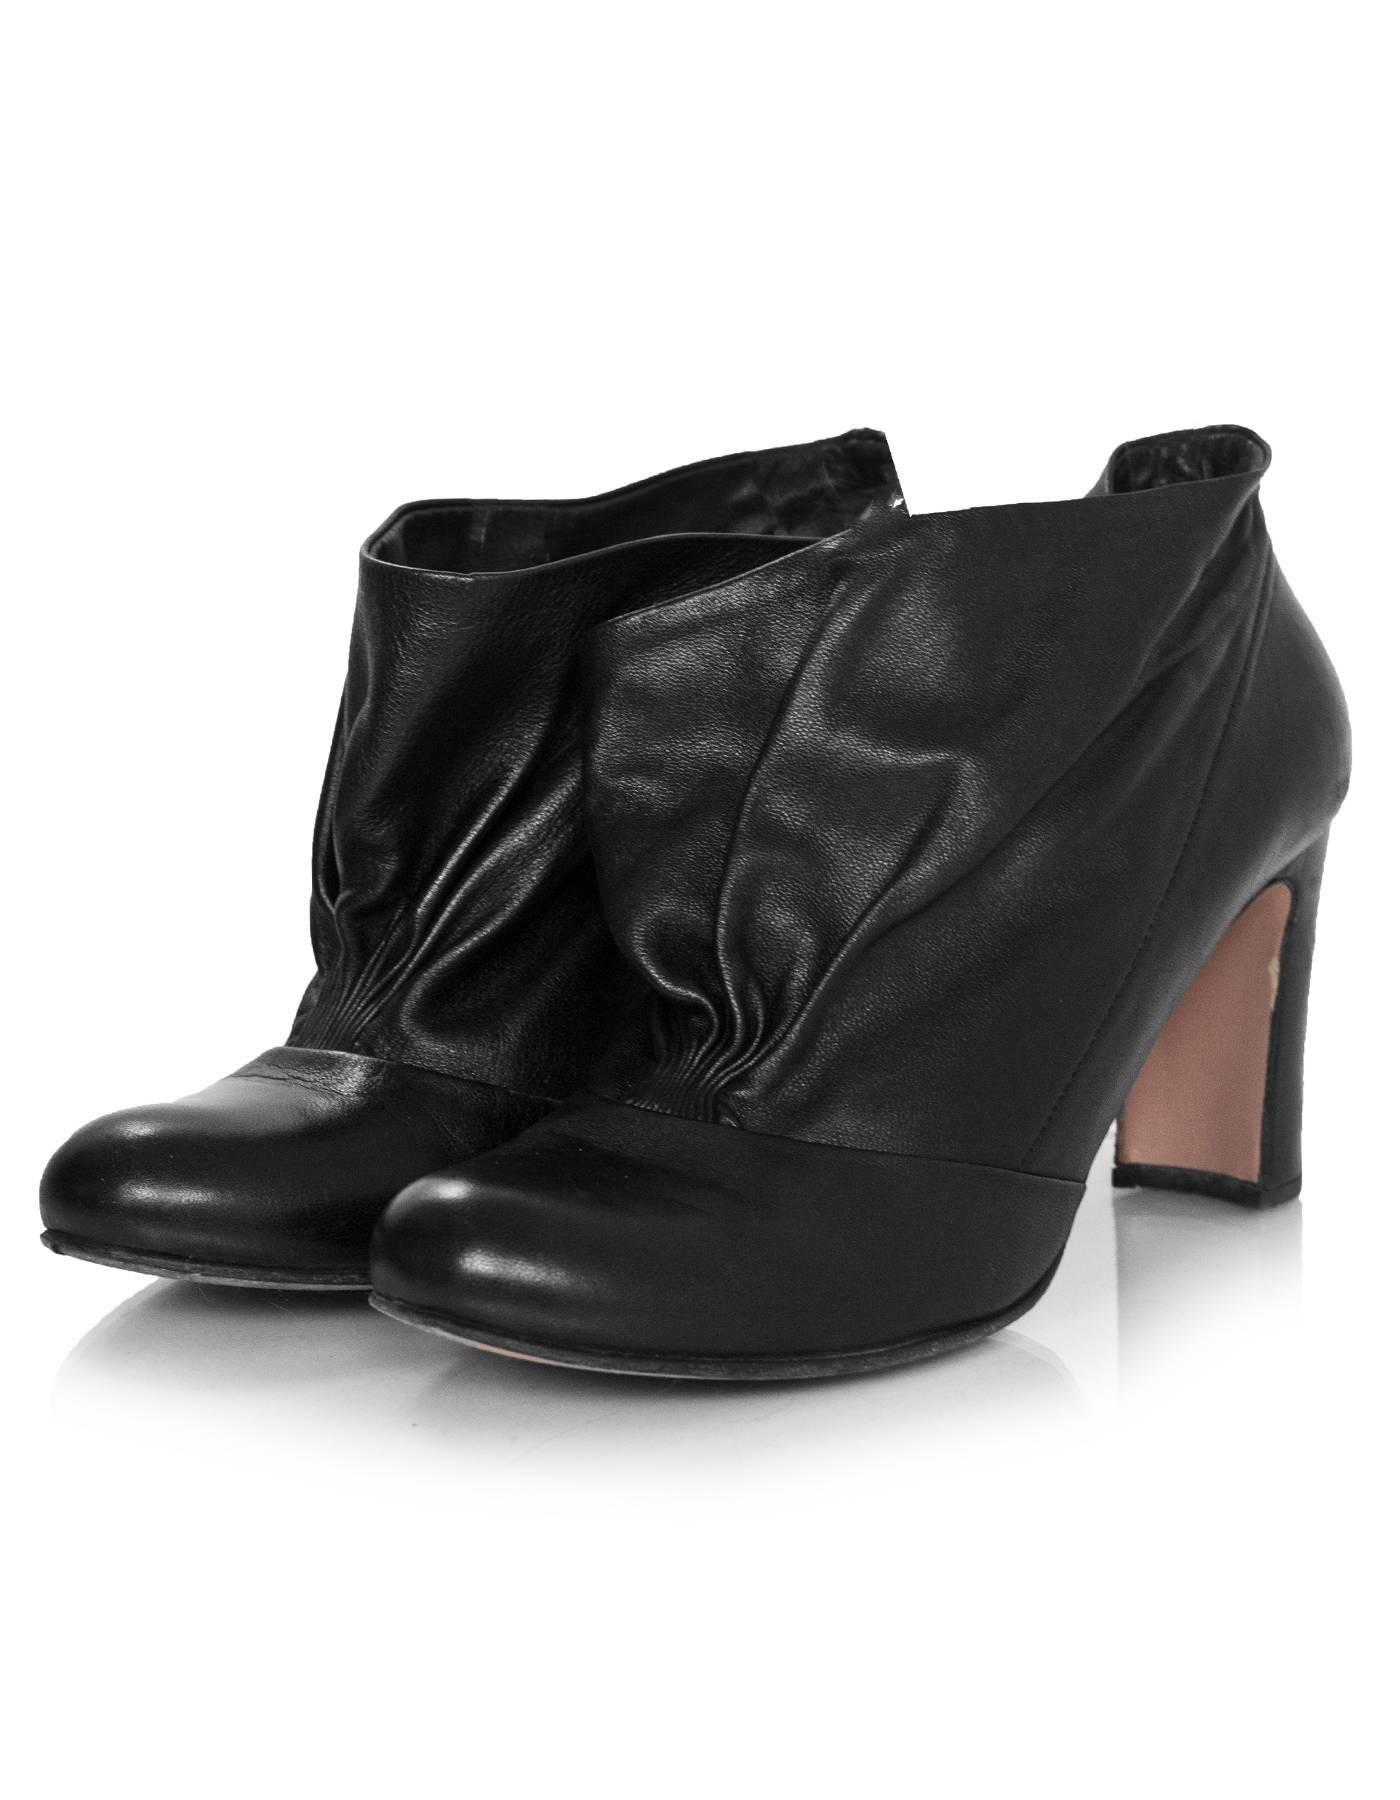 Prada Black Leather Booties Sz 37.5

Made In: Italy
Color: Black
Materials: Leather
Closure/Opening: Slip on
Sole Stamp: Prada 37.5 Made in Italy
Overall Condition: Excellent pre-owned condition with the exception of some wear at outsoles, marks at